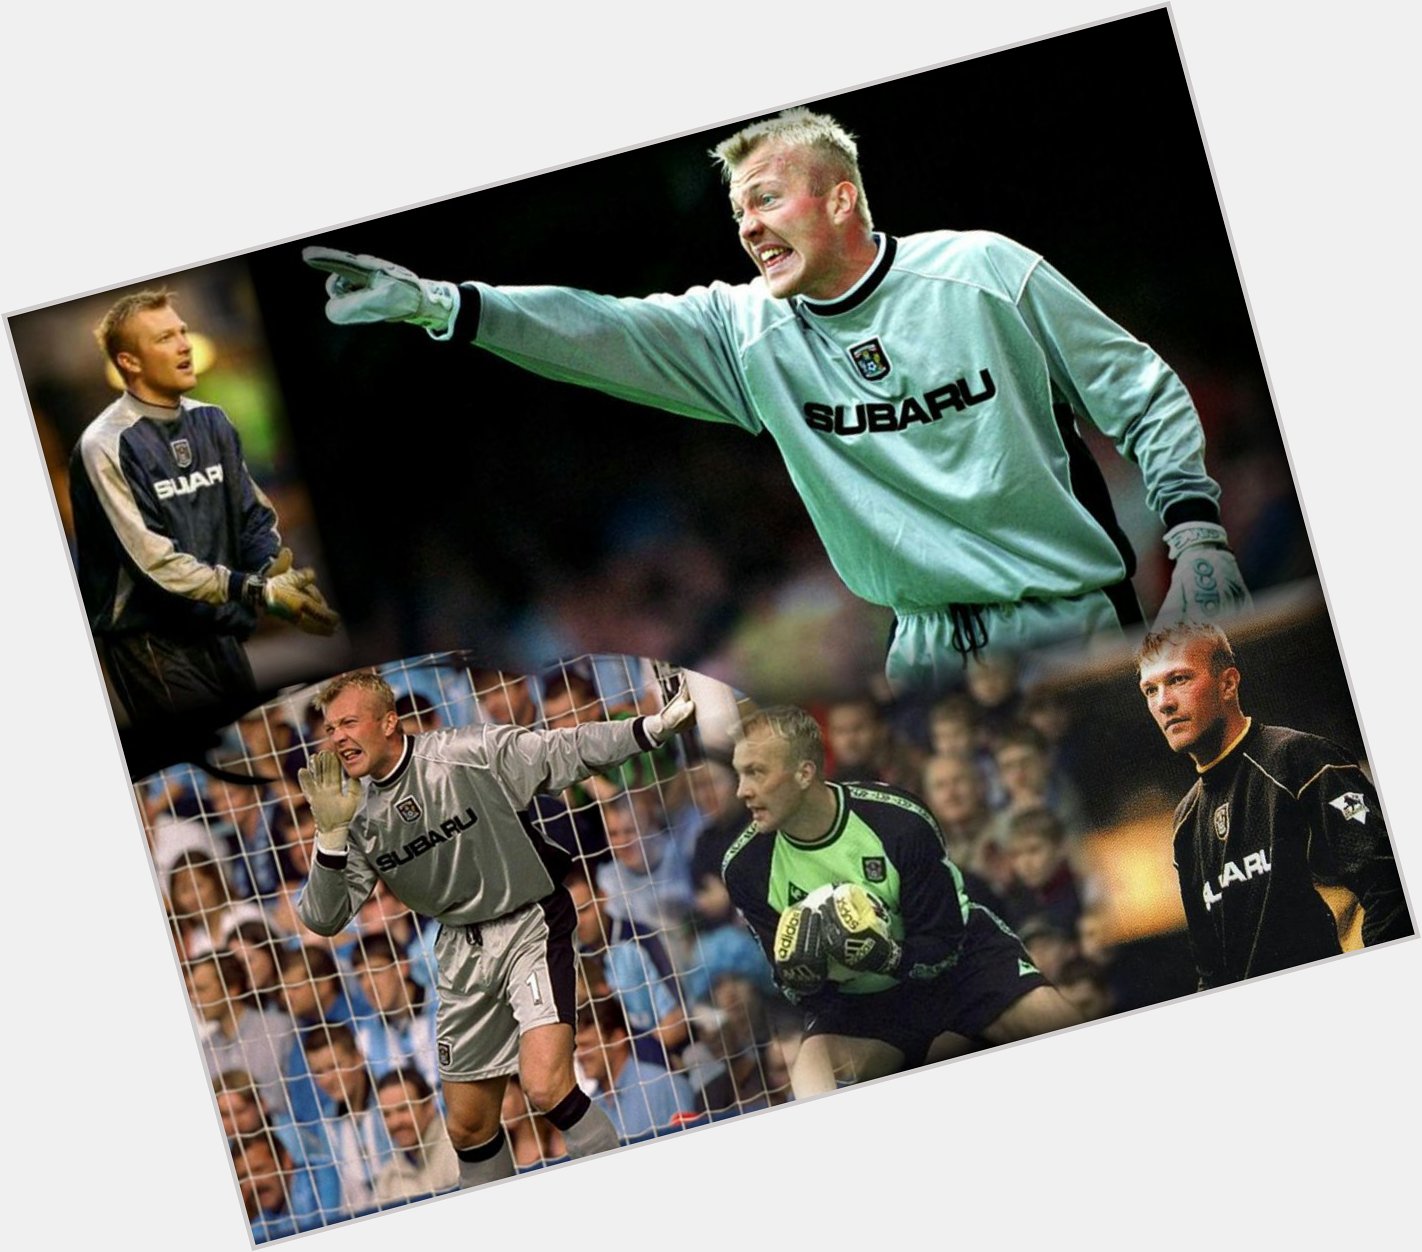 Happy 44th birthday to former keeper played for City 1997-2002 playing 151 games, 